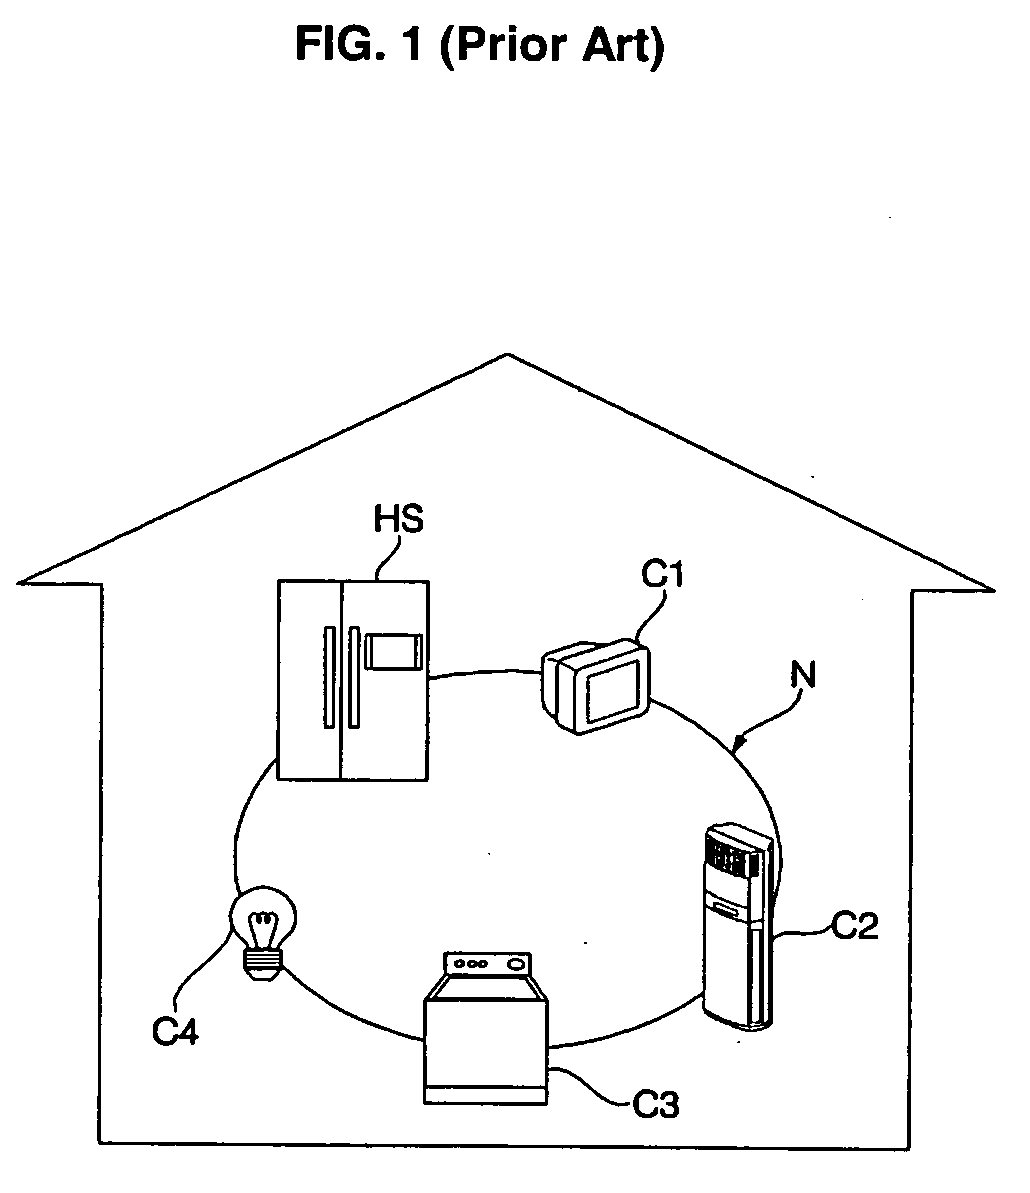 Home network system and method for operating the same